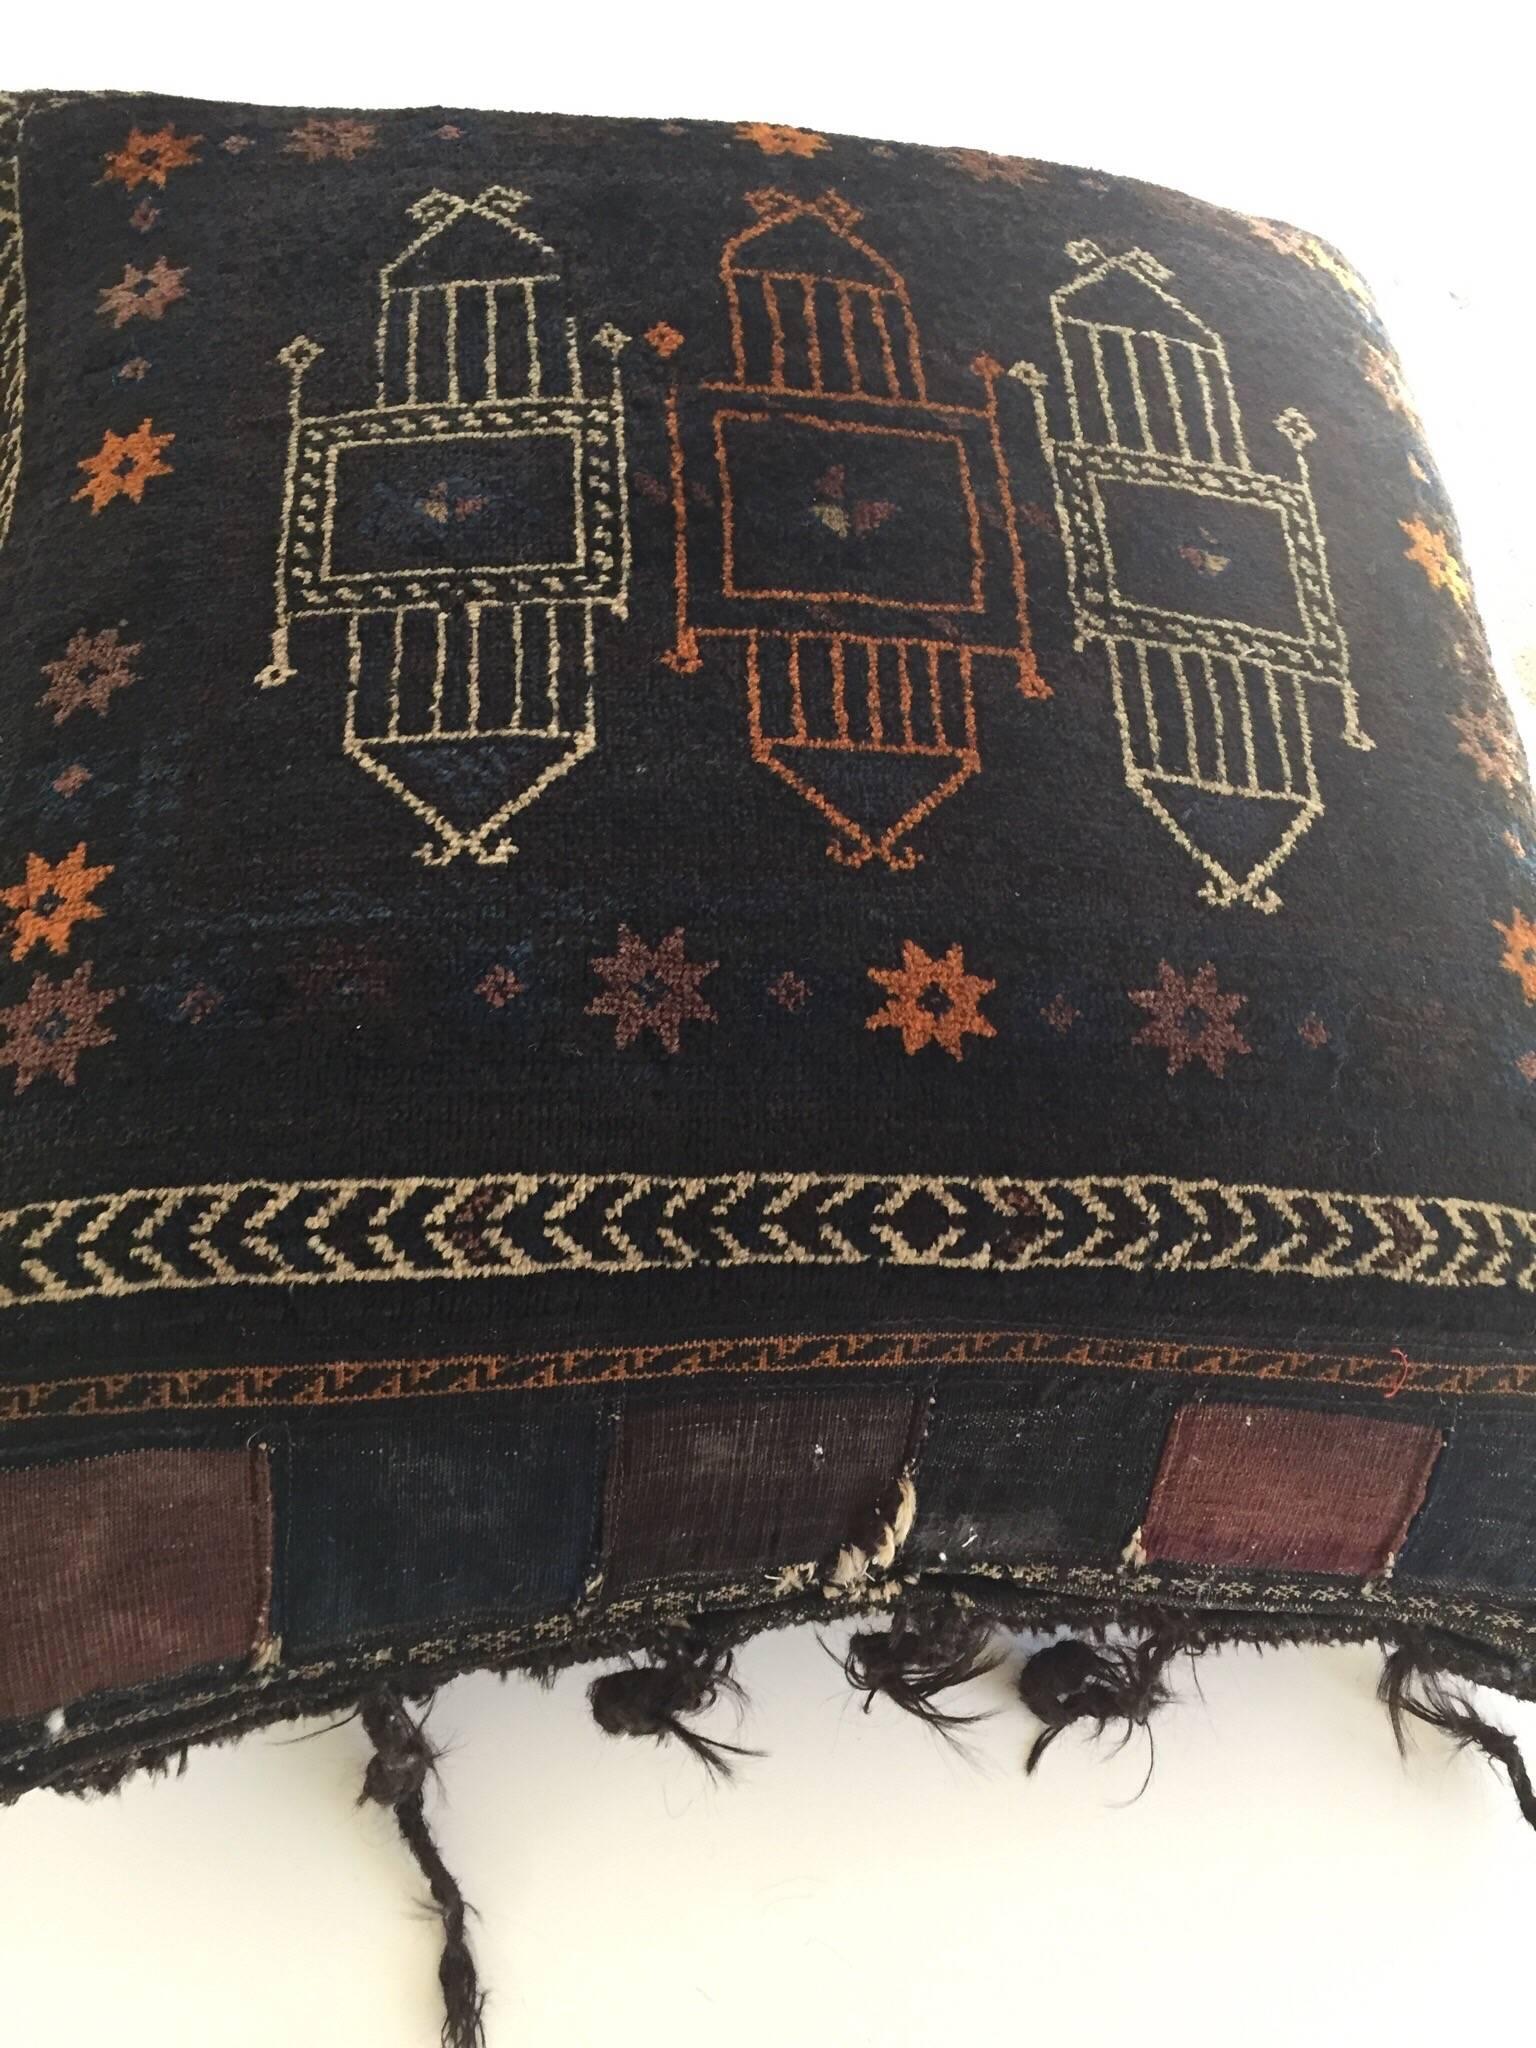 Wool Handmade Antique Collectible Afghan Baluch Saddle Bag Tribal Large Floor Cushion